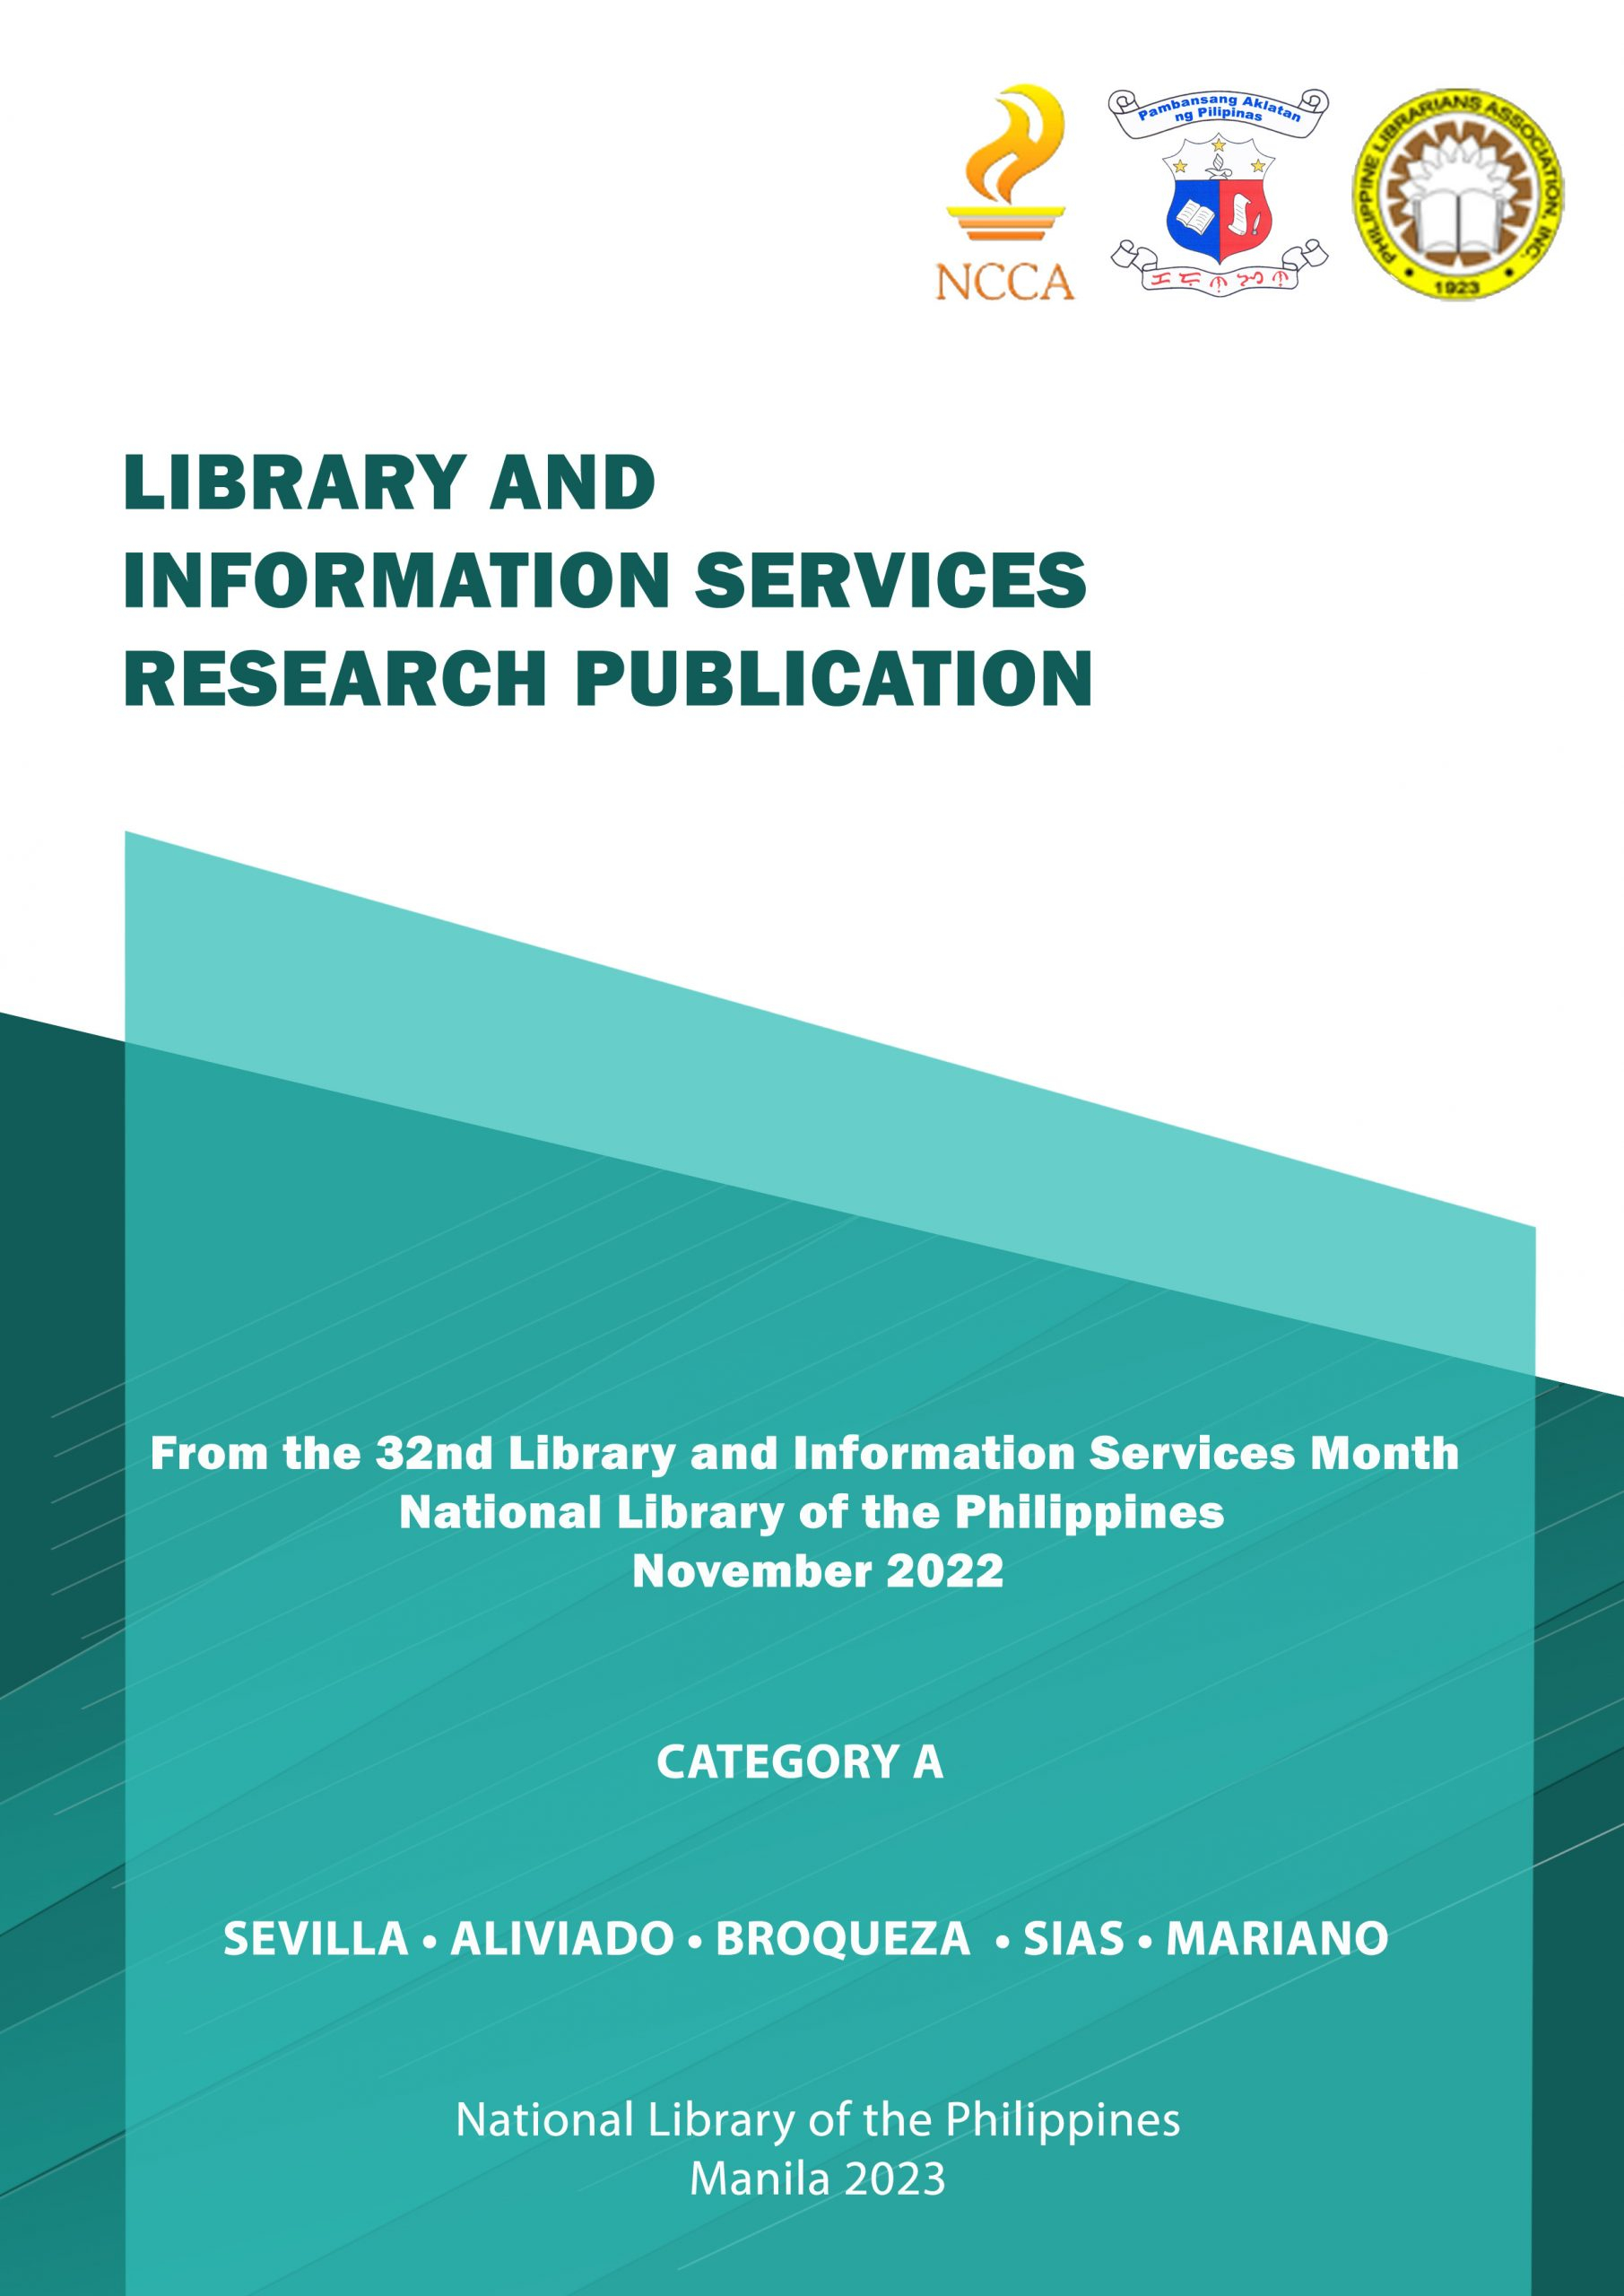 LIBRARY AND INFORMATION SERVICES Front 2 Category A